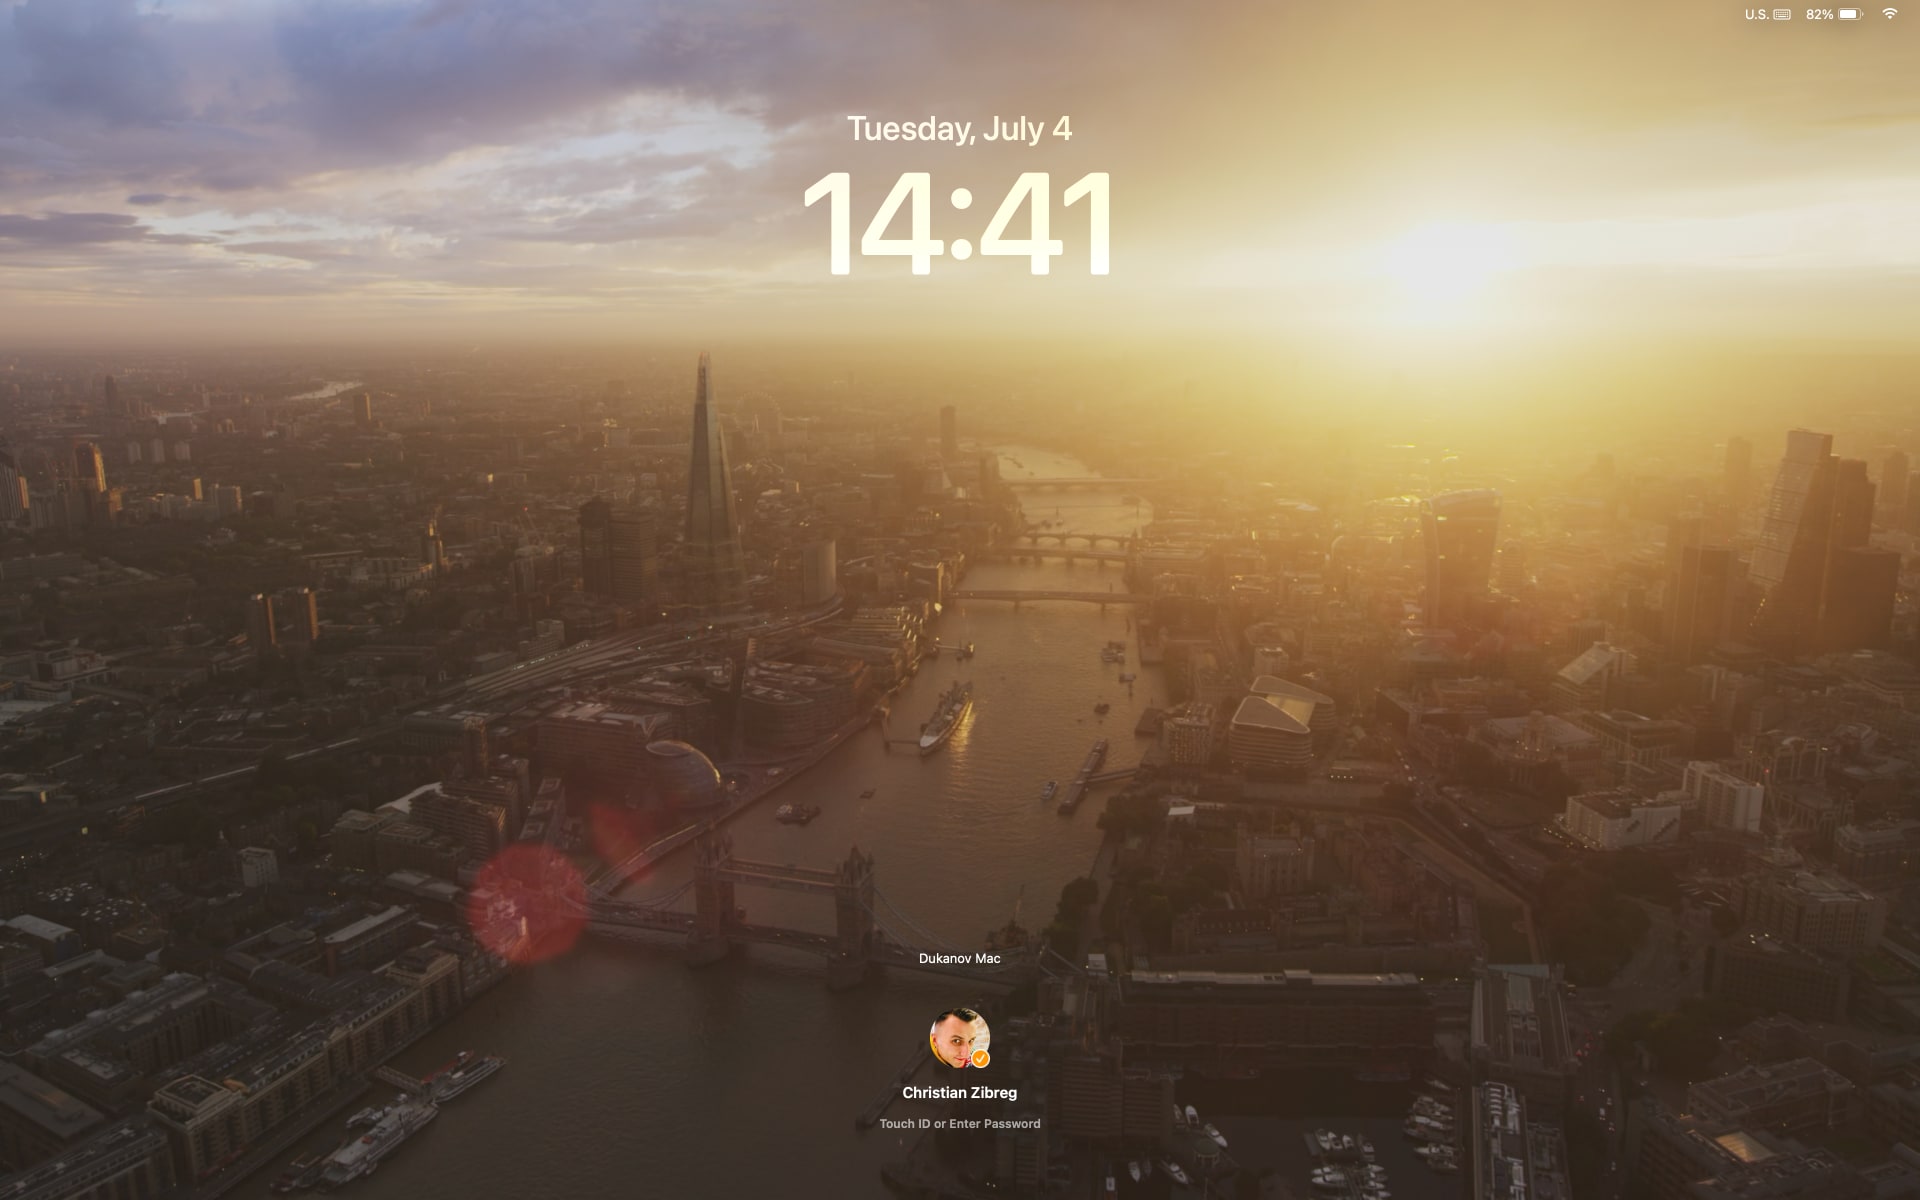 The Mac's Lock Screen with the London aerial theme